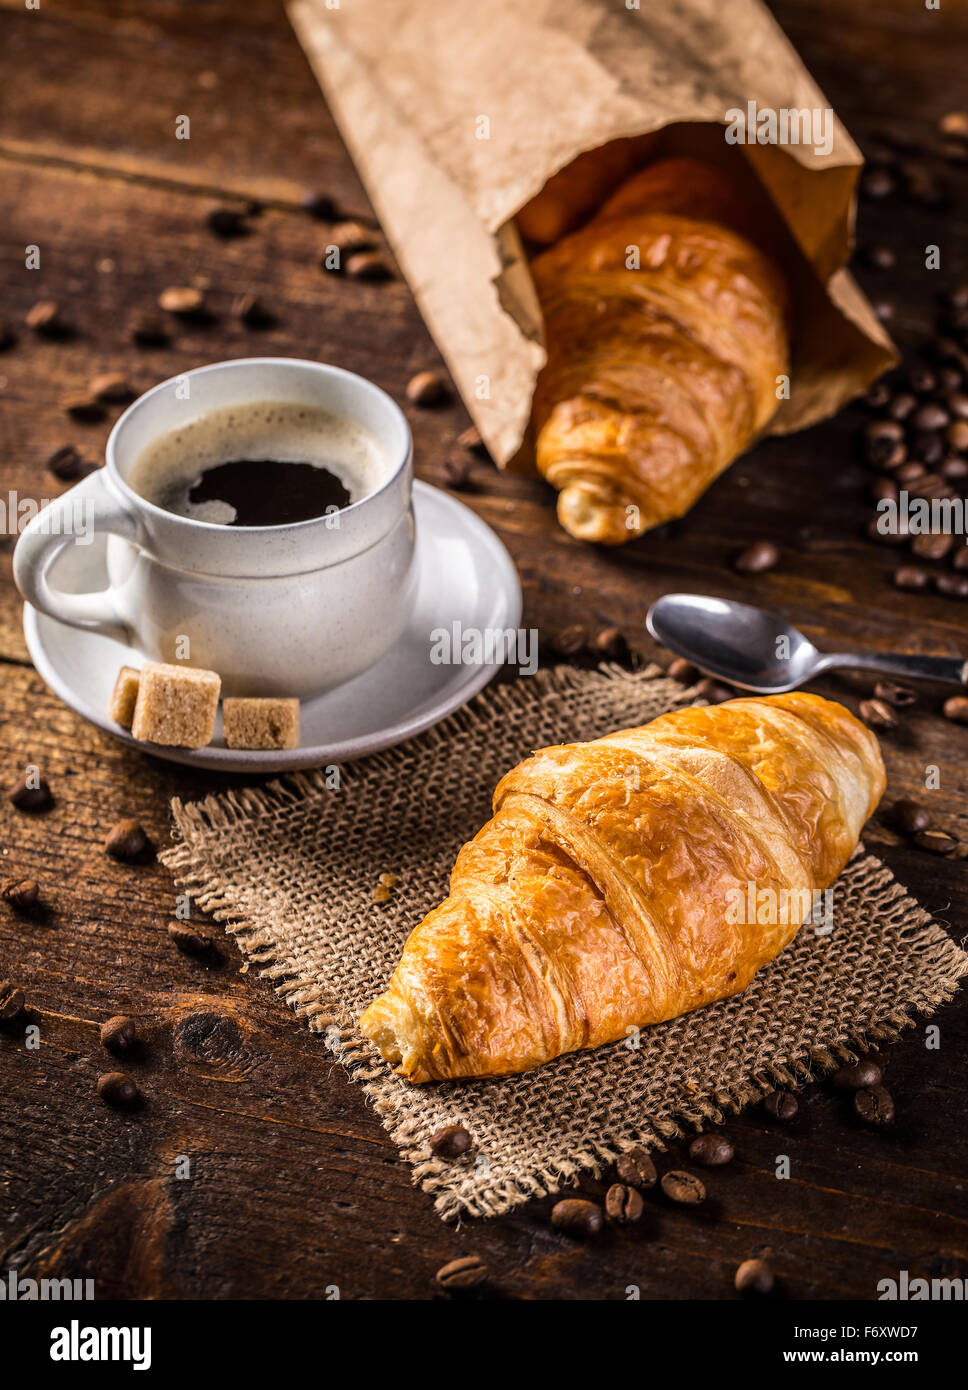 Croissant and coffee on vintage style Stock Photo